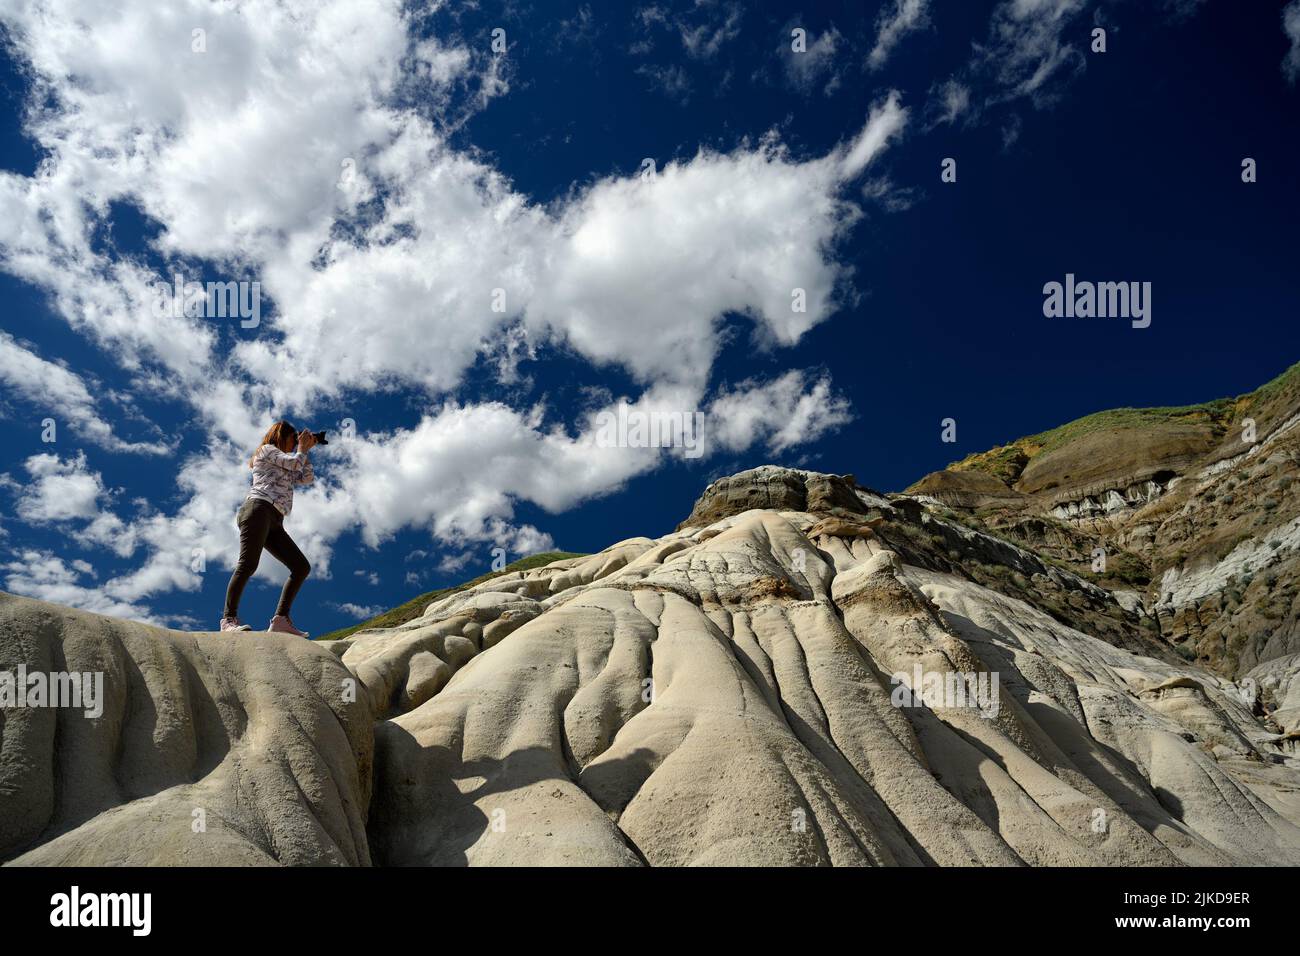 Tourist woman standing on a sandstone and photographing the Hoodoos and rock formations in the Canadian Badlands, Drumheller, Alberta, Canada. Stock Photo